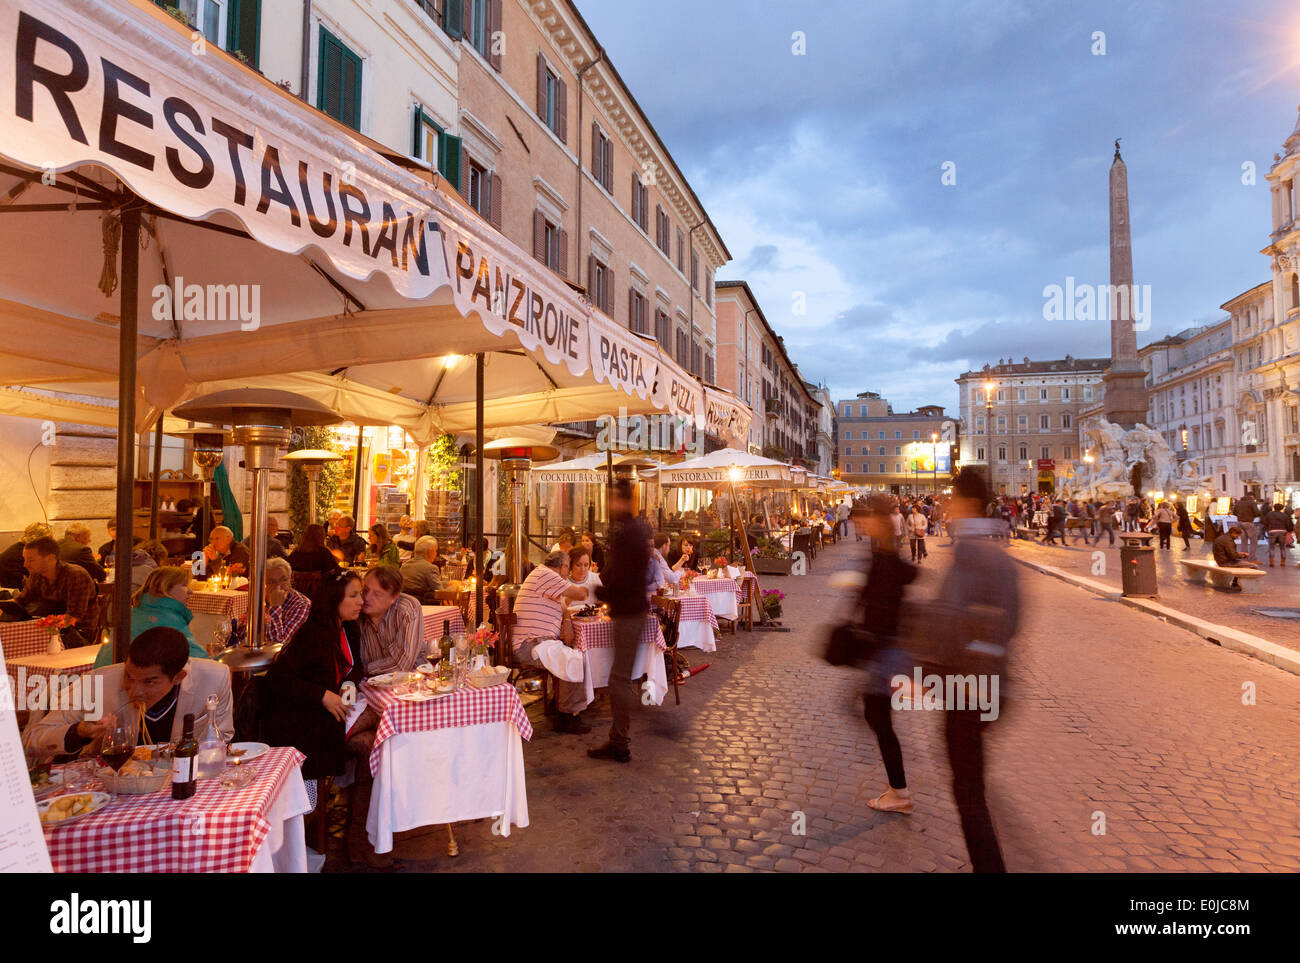 People eating at a restaurant in the early evening, Piazza Navona, Rome, Italy Europe Stock Photo